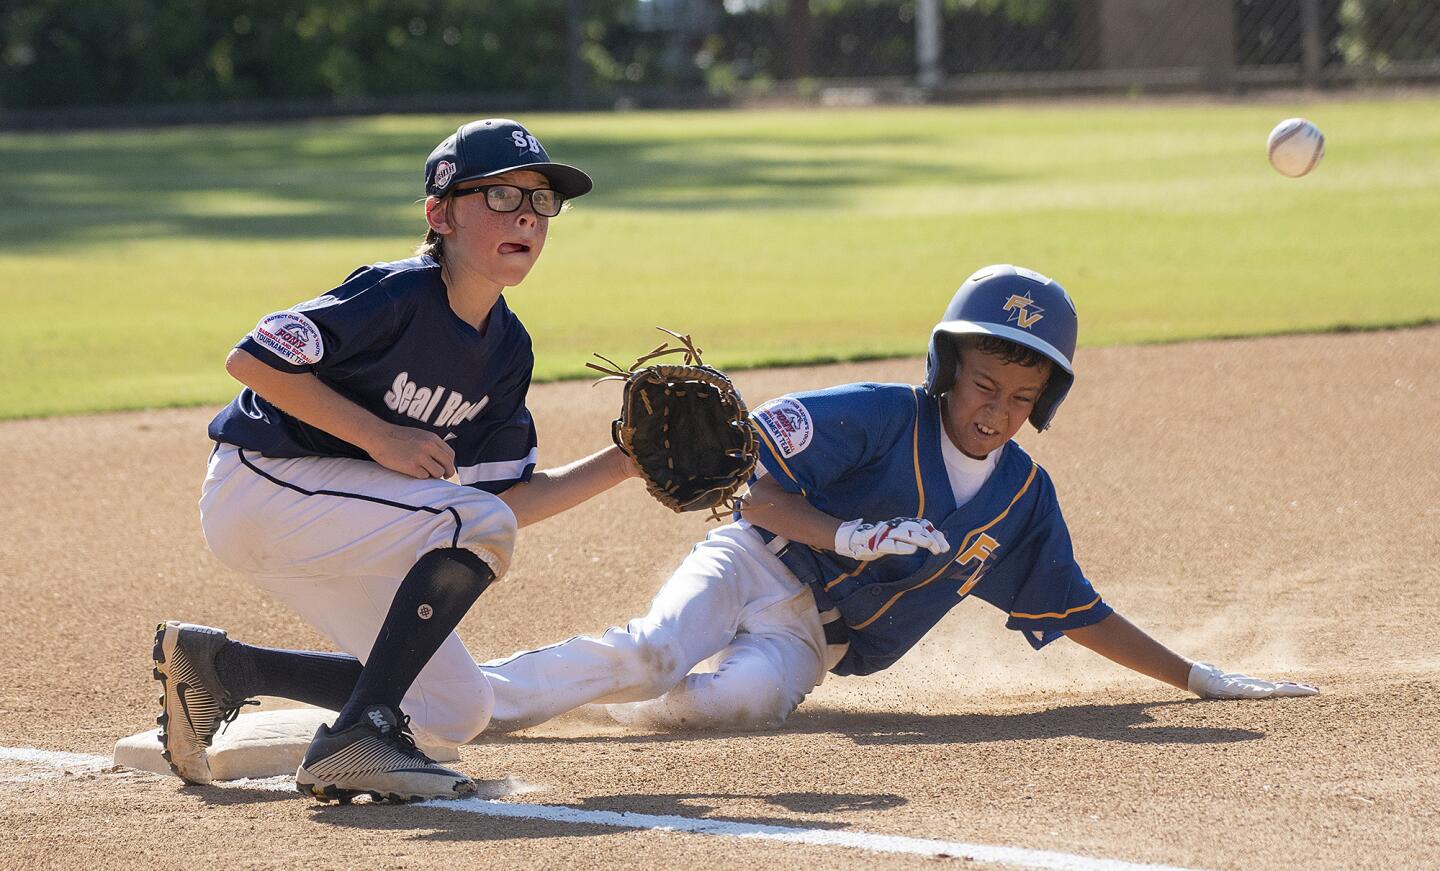 Fountain Valley's Andrew Castillo beats the throw at third against Seal Beach's Ryder Velasco-Buonassissi during a PONY Mustang 11-and-under Regional tournament at Hicks Canyon Park in Irvine on Thursday, July 12.